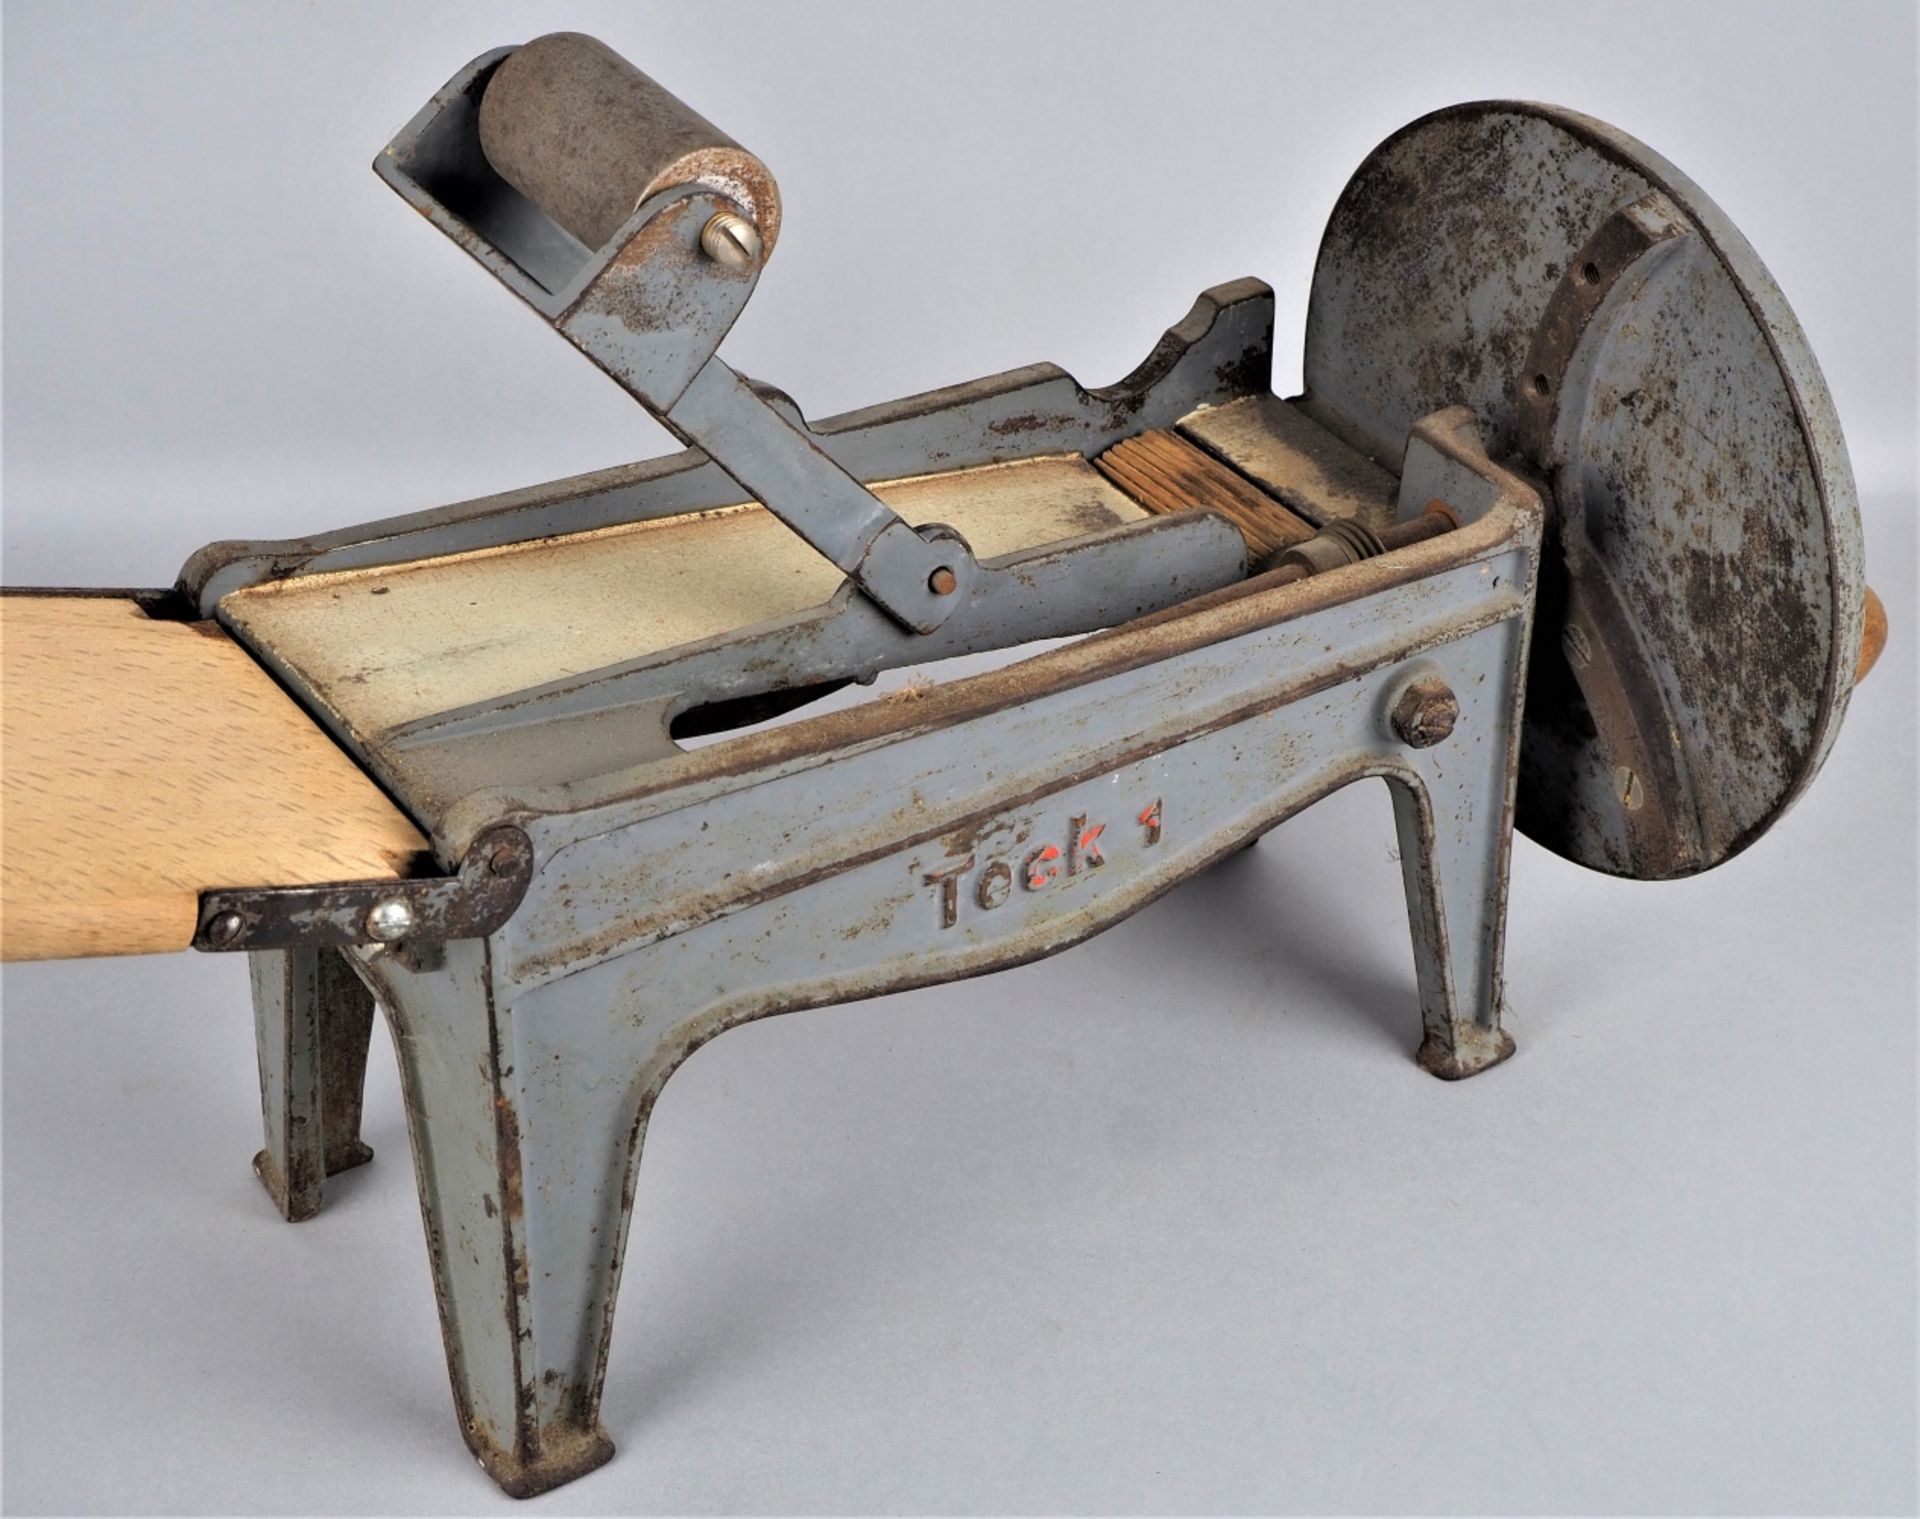 Tobacco cutter with crank, around 1900. - Image 2 of 2